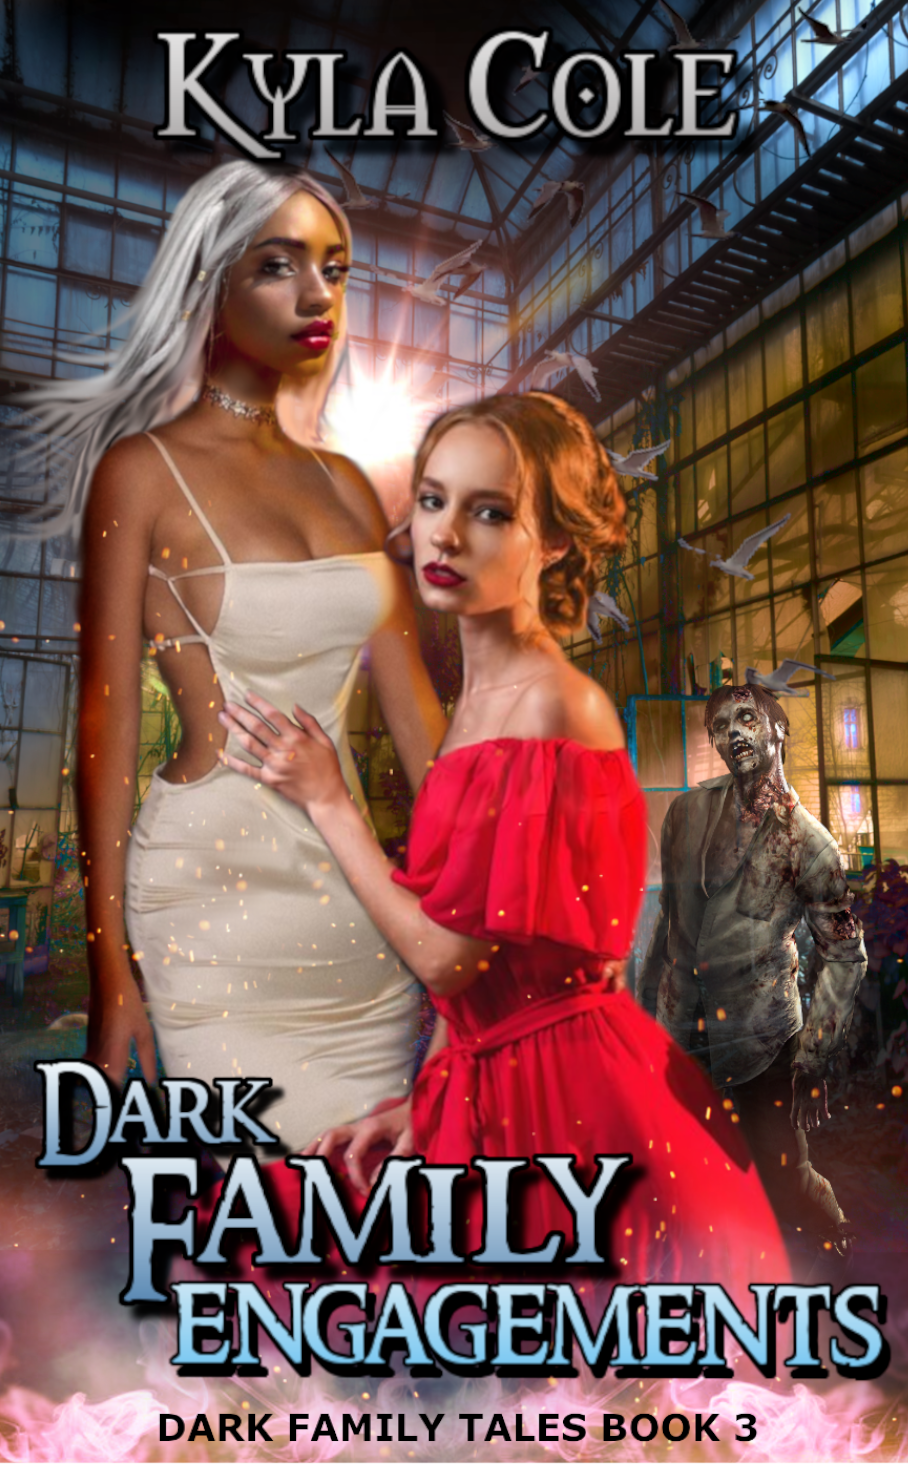 FREE: Dark Family Engagements by Kyla Cole